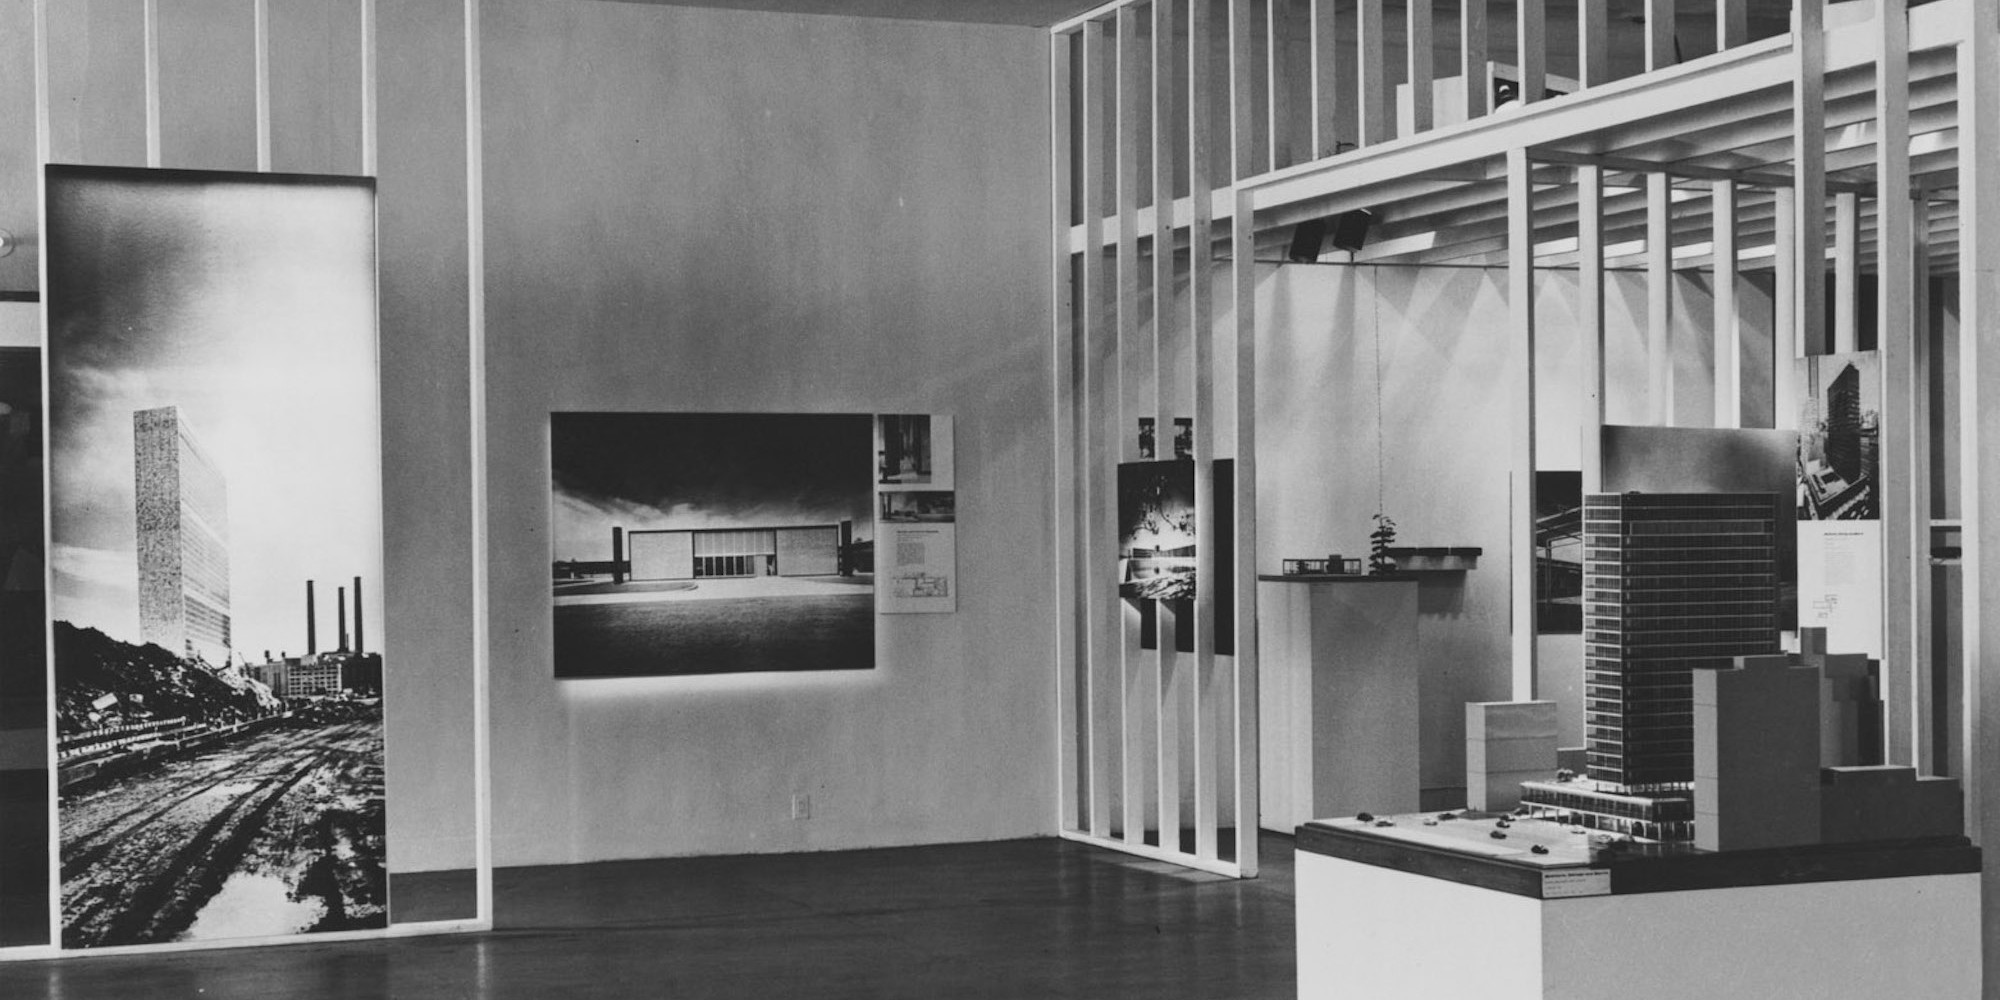 Installation view of the exhibition Built in USA: Post-War Architecture, The Museum of Modern Art, New York, January 20–March 15, 1953. Photographic Archive. The Museum of Modern Art Archives, New York